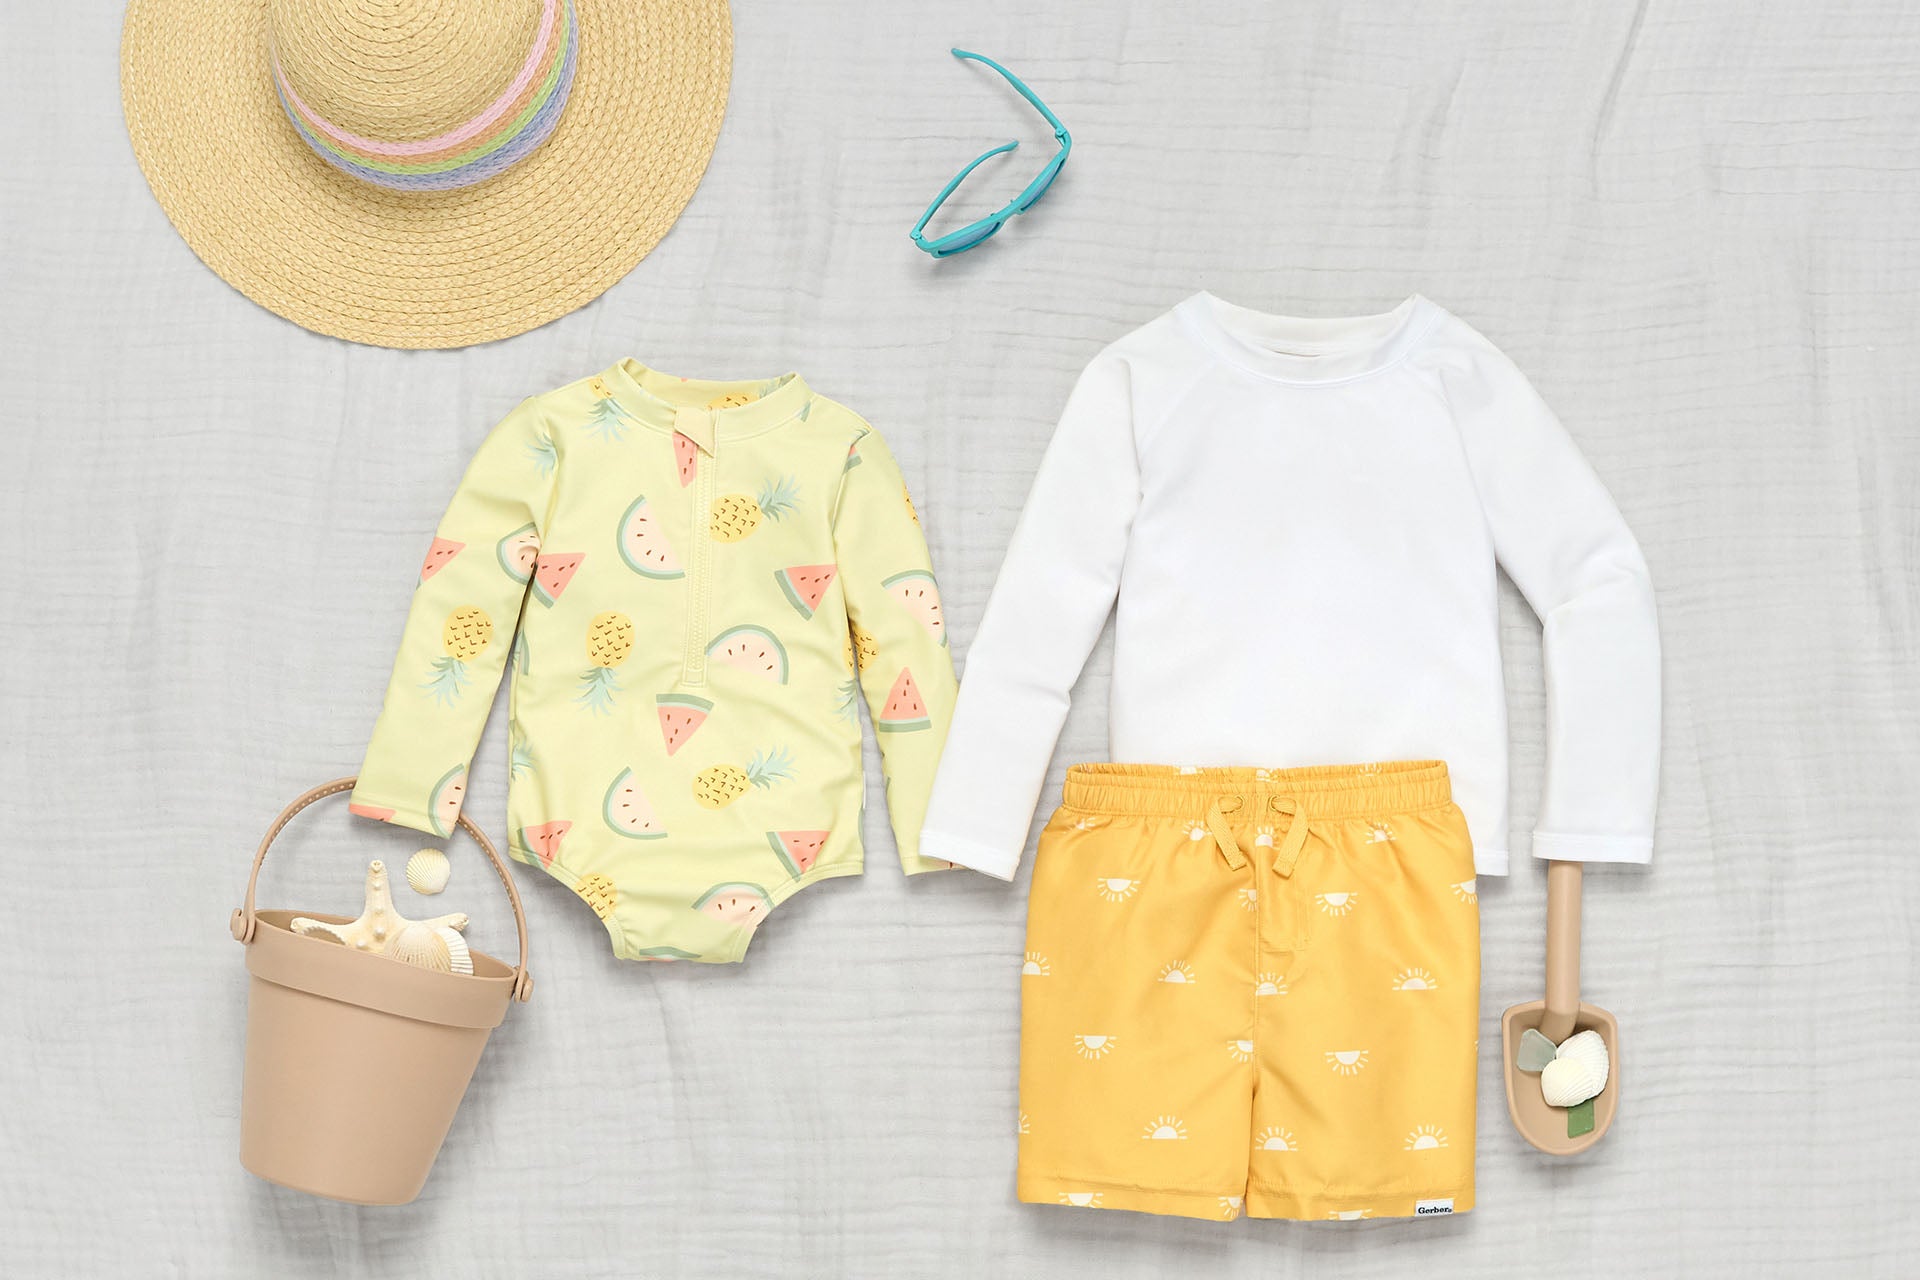 Flat lay of children's clothing including patterned girls swimsuit, boys white rashguard shirt, yellow swim shorts, with accessories like a straw hat, sunglasses, bag, and toy on a gray fabric background.